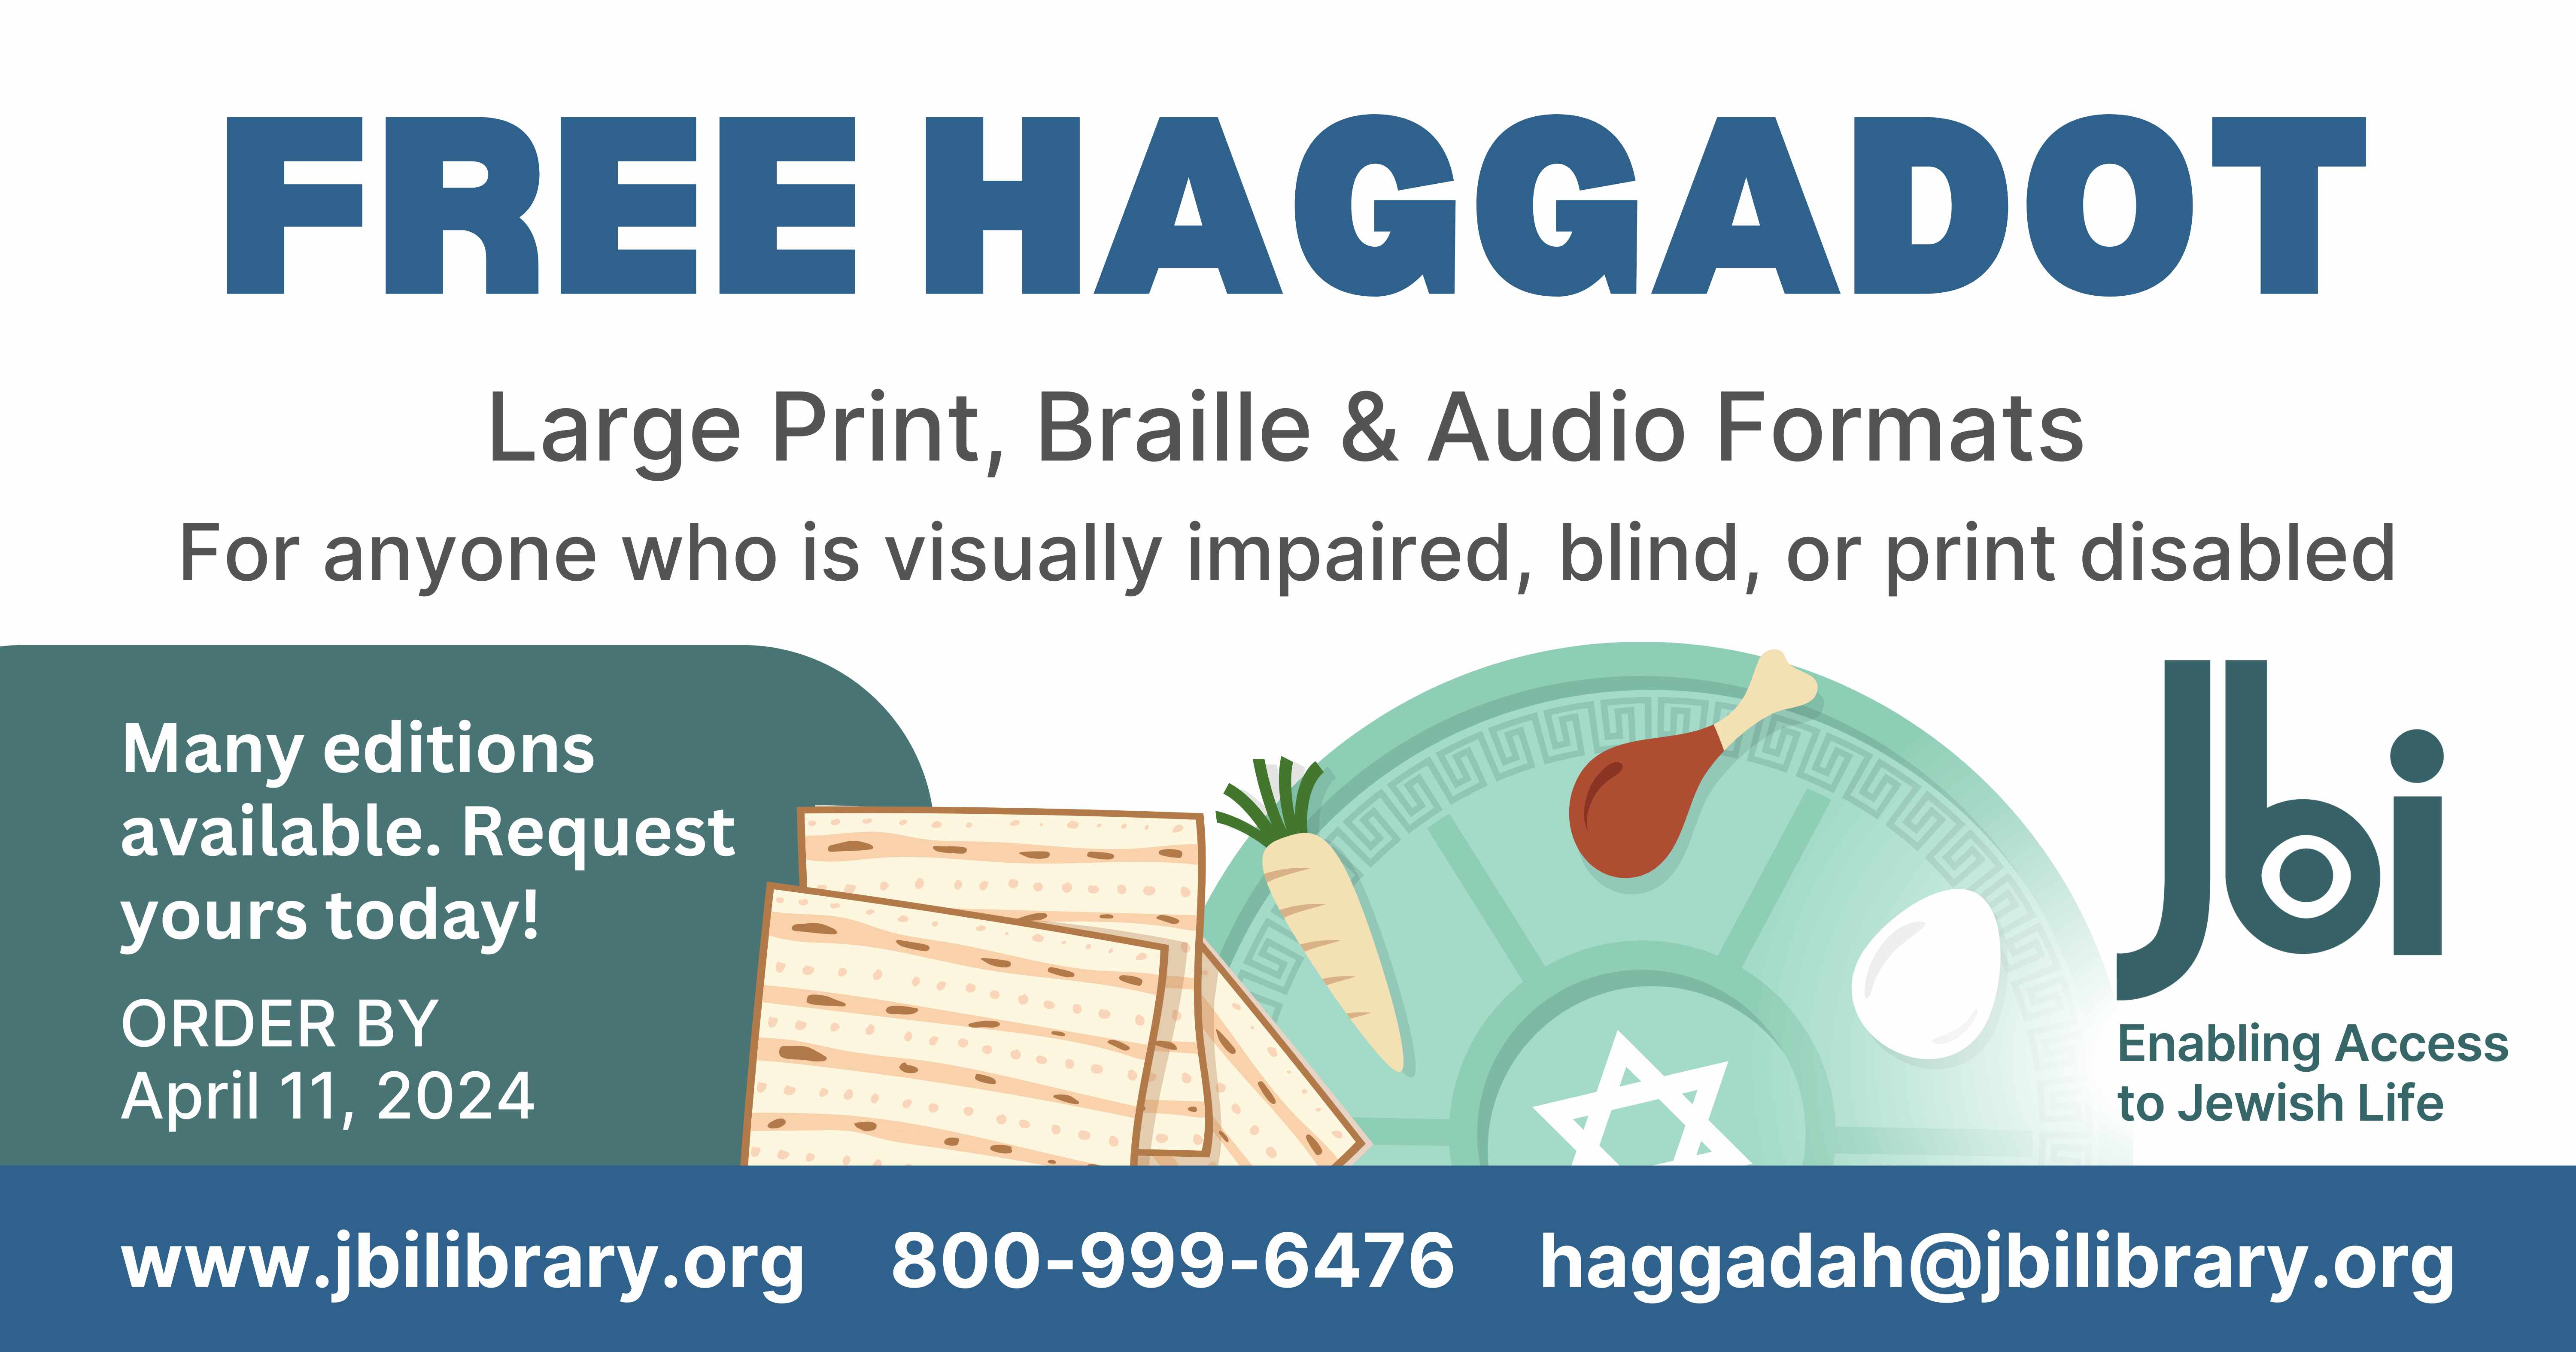 If you or someone you know needs a large print, braille, or audio format Haggadah, please visit www.jbilibrary.org/haggadah or call JBI toll free at 1-800-999-6476 before April 11 and we will be happy to send you your Haggadah, completely free of charge. We have many different versions available—request yours today!